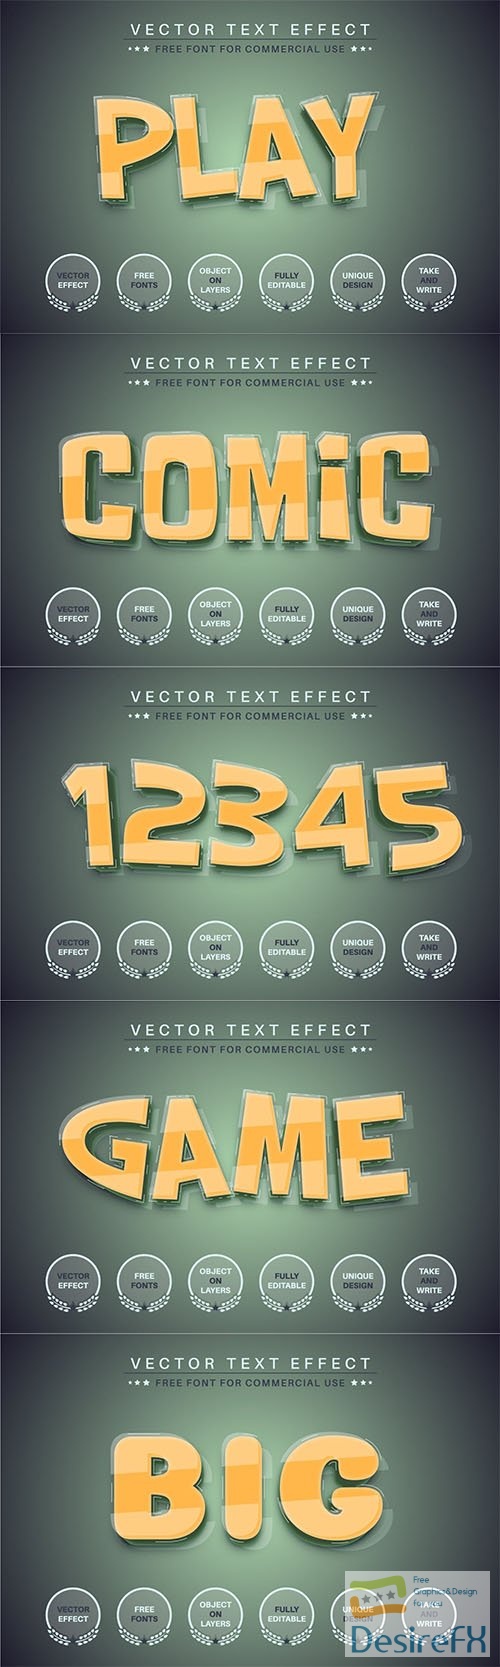 Play game - editable text effect, font style